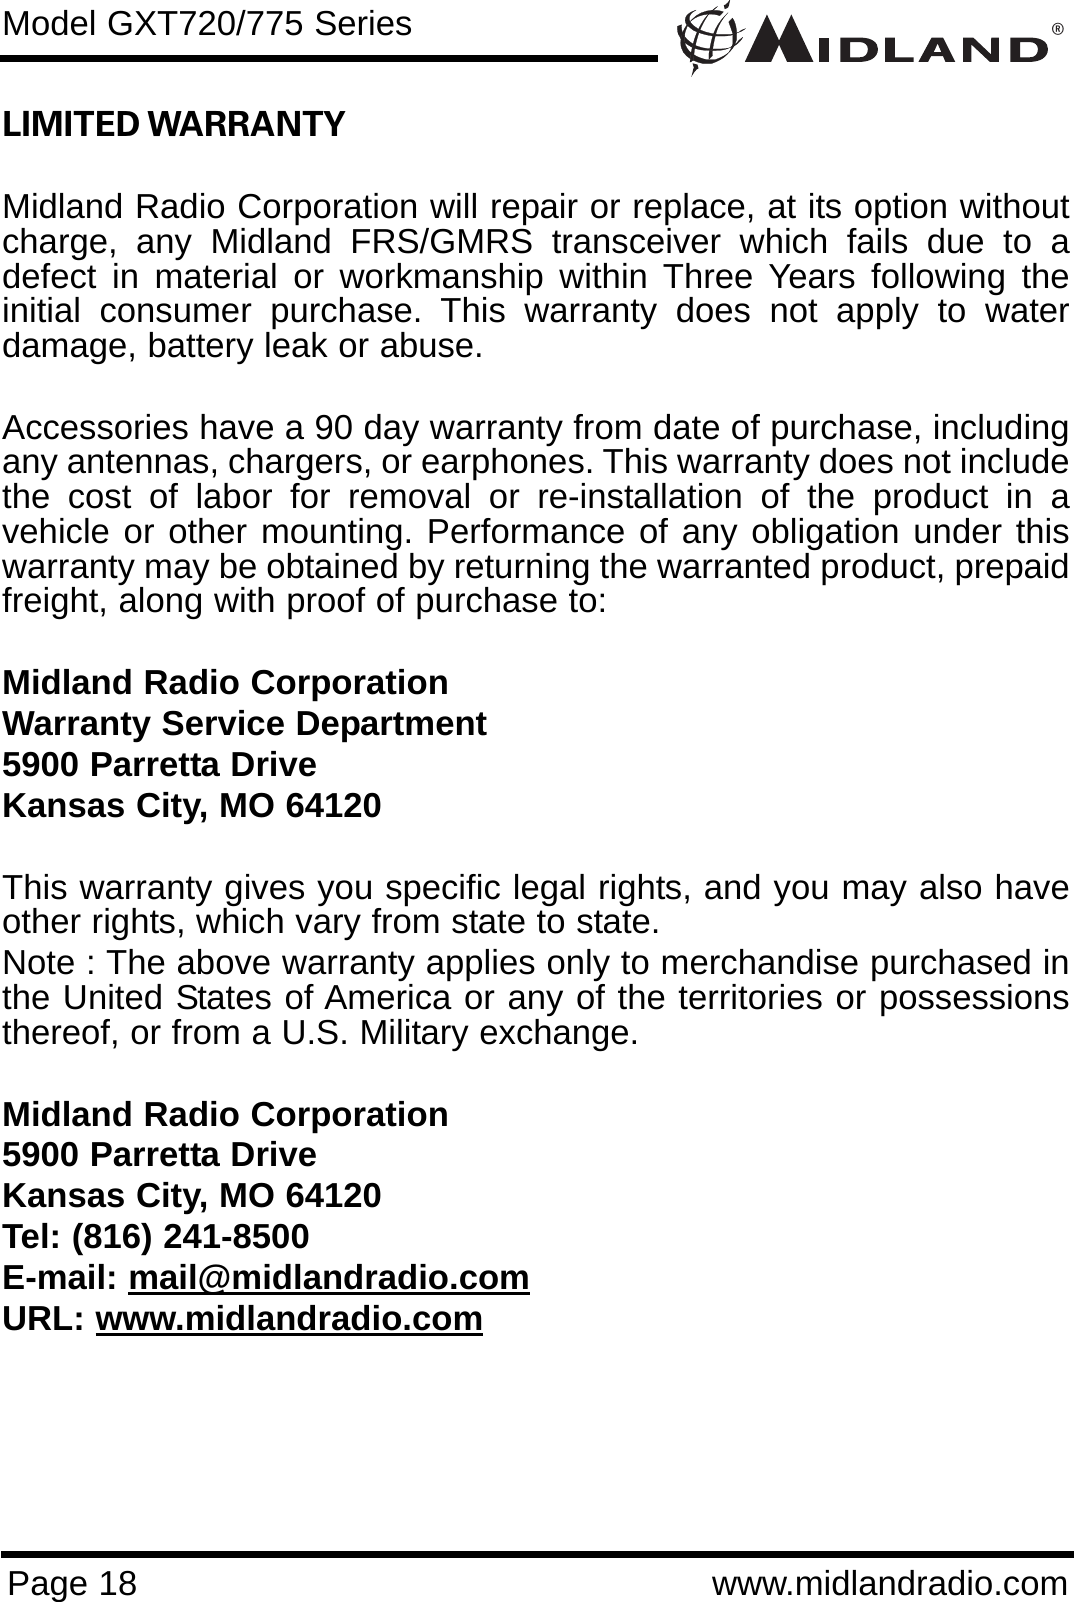 ®Page 18 www.midlandradio.comLIMITED WARRANTY Midland Radio Corporation will repair or replace, at its option withoutcharge, any Midland FRS/GMRS transceiver which fails due to adefect in material or workmanship within Three Years following theinitial consumer purchase. This warranty does not apply to waterdamage, battery leak or abuse.Accessories have a 90 day warranty from date of purchase, includingany antennas, chargers, or earphones. This warranty does not includethe cost of labor for removal or re-installation of the product in avehicle or other mounting. Performance of any obligation under thiswarranty may be obtained by returning the warranted product, prepaidfreight, along with proof of purchase to:Midland Radio CorporationWarranty Service Department5900 Parretta DriveKansas City, MO 64120This warranty gives you specific legal rights, and you may also haveother rights, which vary from state to state.Note : The above warranty applies only to merchandise purchased inthe United States of America or any of the territories or possessionsthereof, or from a U.S. Military exchange.Midland Radio Corporation5900 Parretta DriveKansas City, MO 64120Tel: (816) 241-8500E-mail: mail@midlandradio.comURL: www.midlandradio.comModel GXT720/775 Series